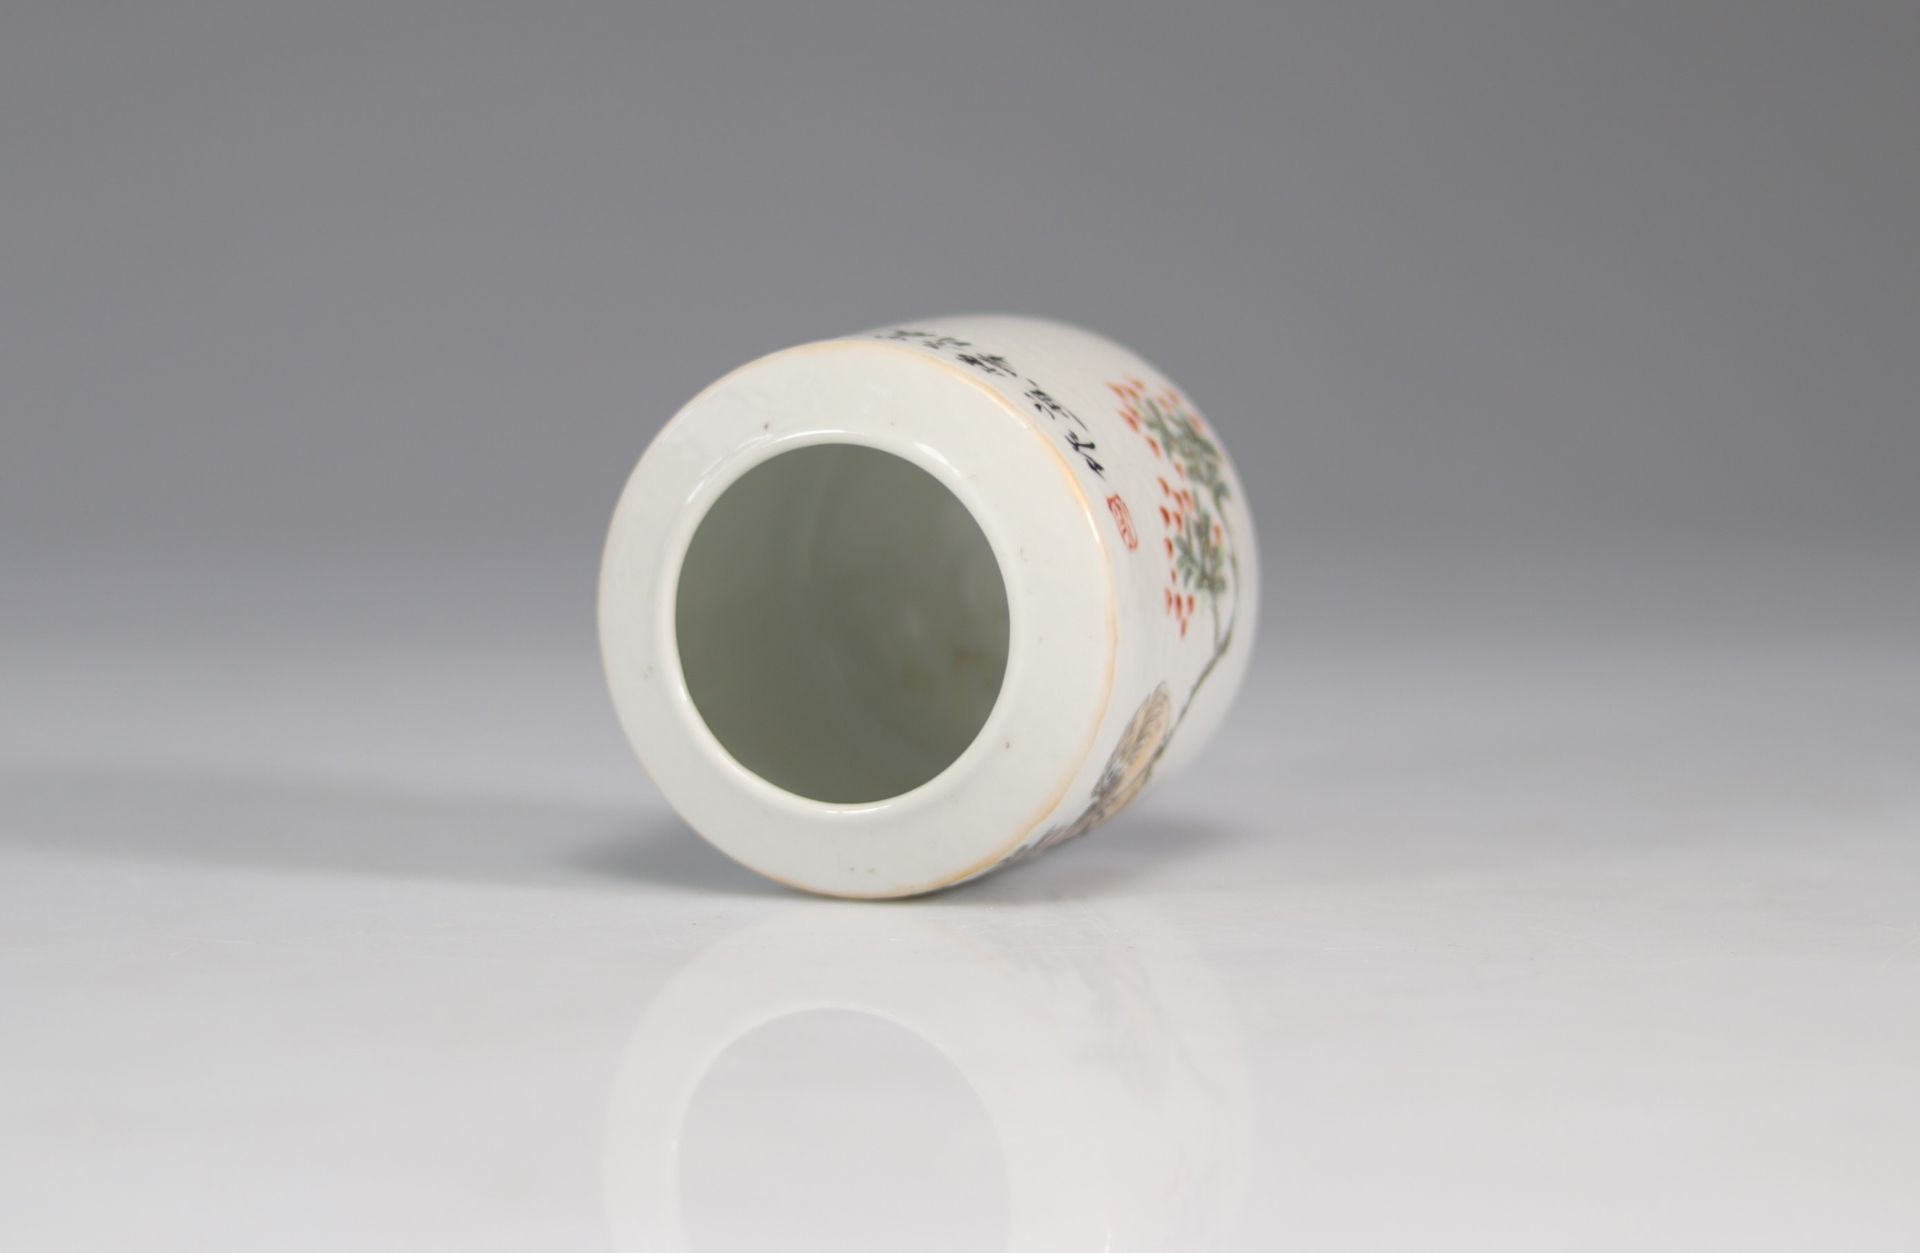 Brush holder in qianjiang cai porcelain with bird decor - Image 5 of 6